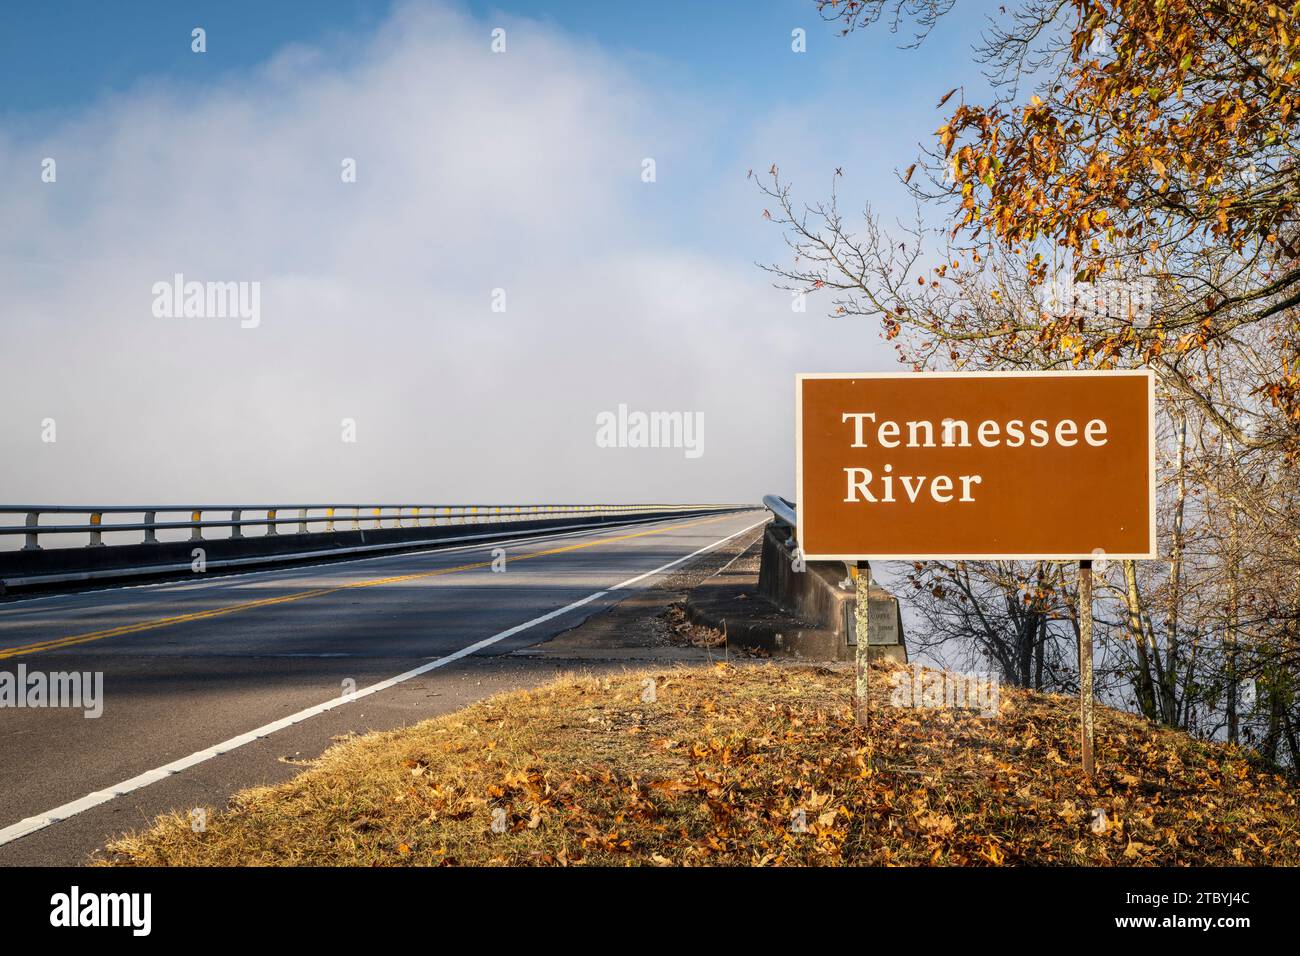 Tennessee River road sign at Natchez Trace Parkway - John Coffee Memorial Bridge, crossing from Tennessee to Alabama in fall scenery Stock Photo